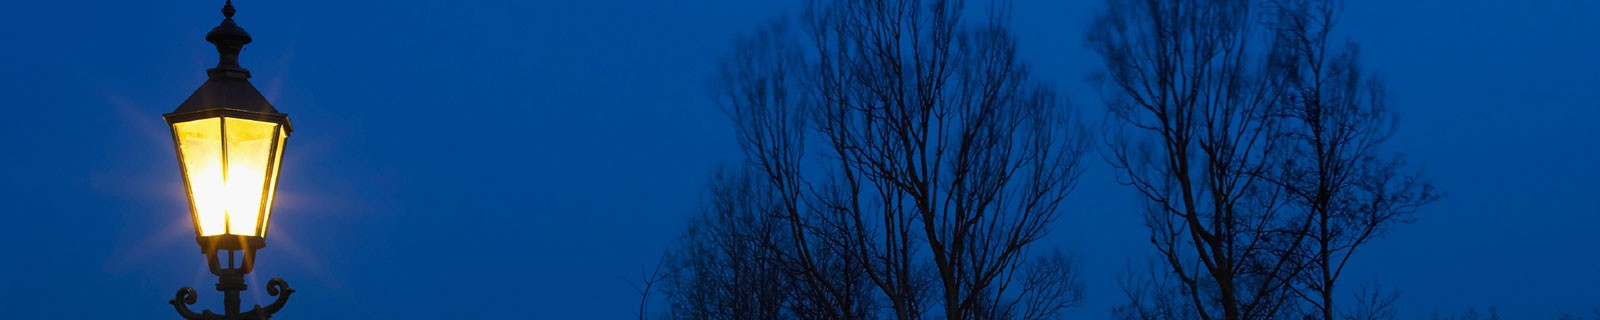 Streetlamp at night with trees in background